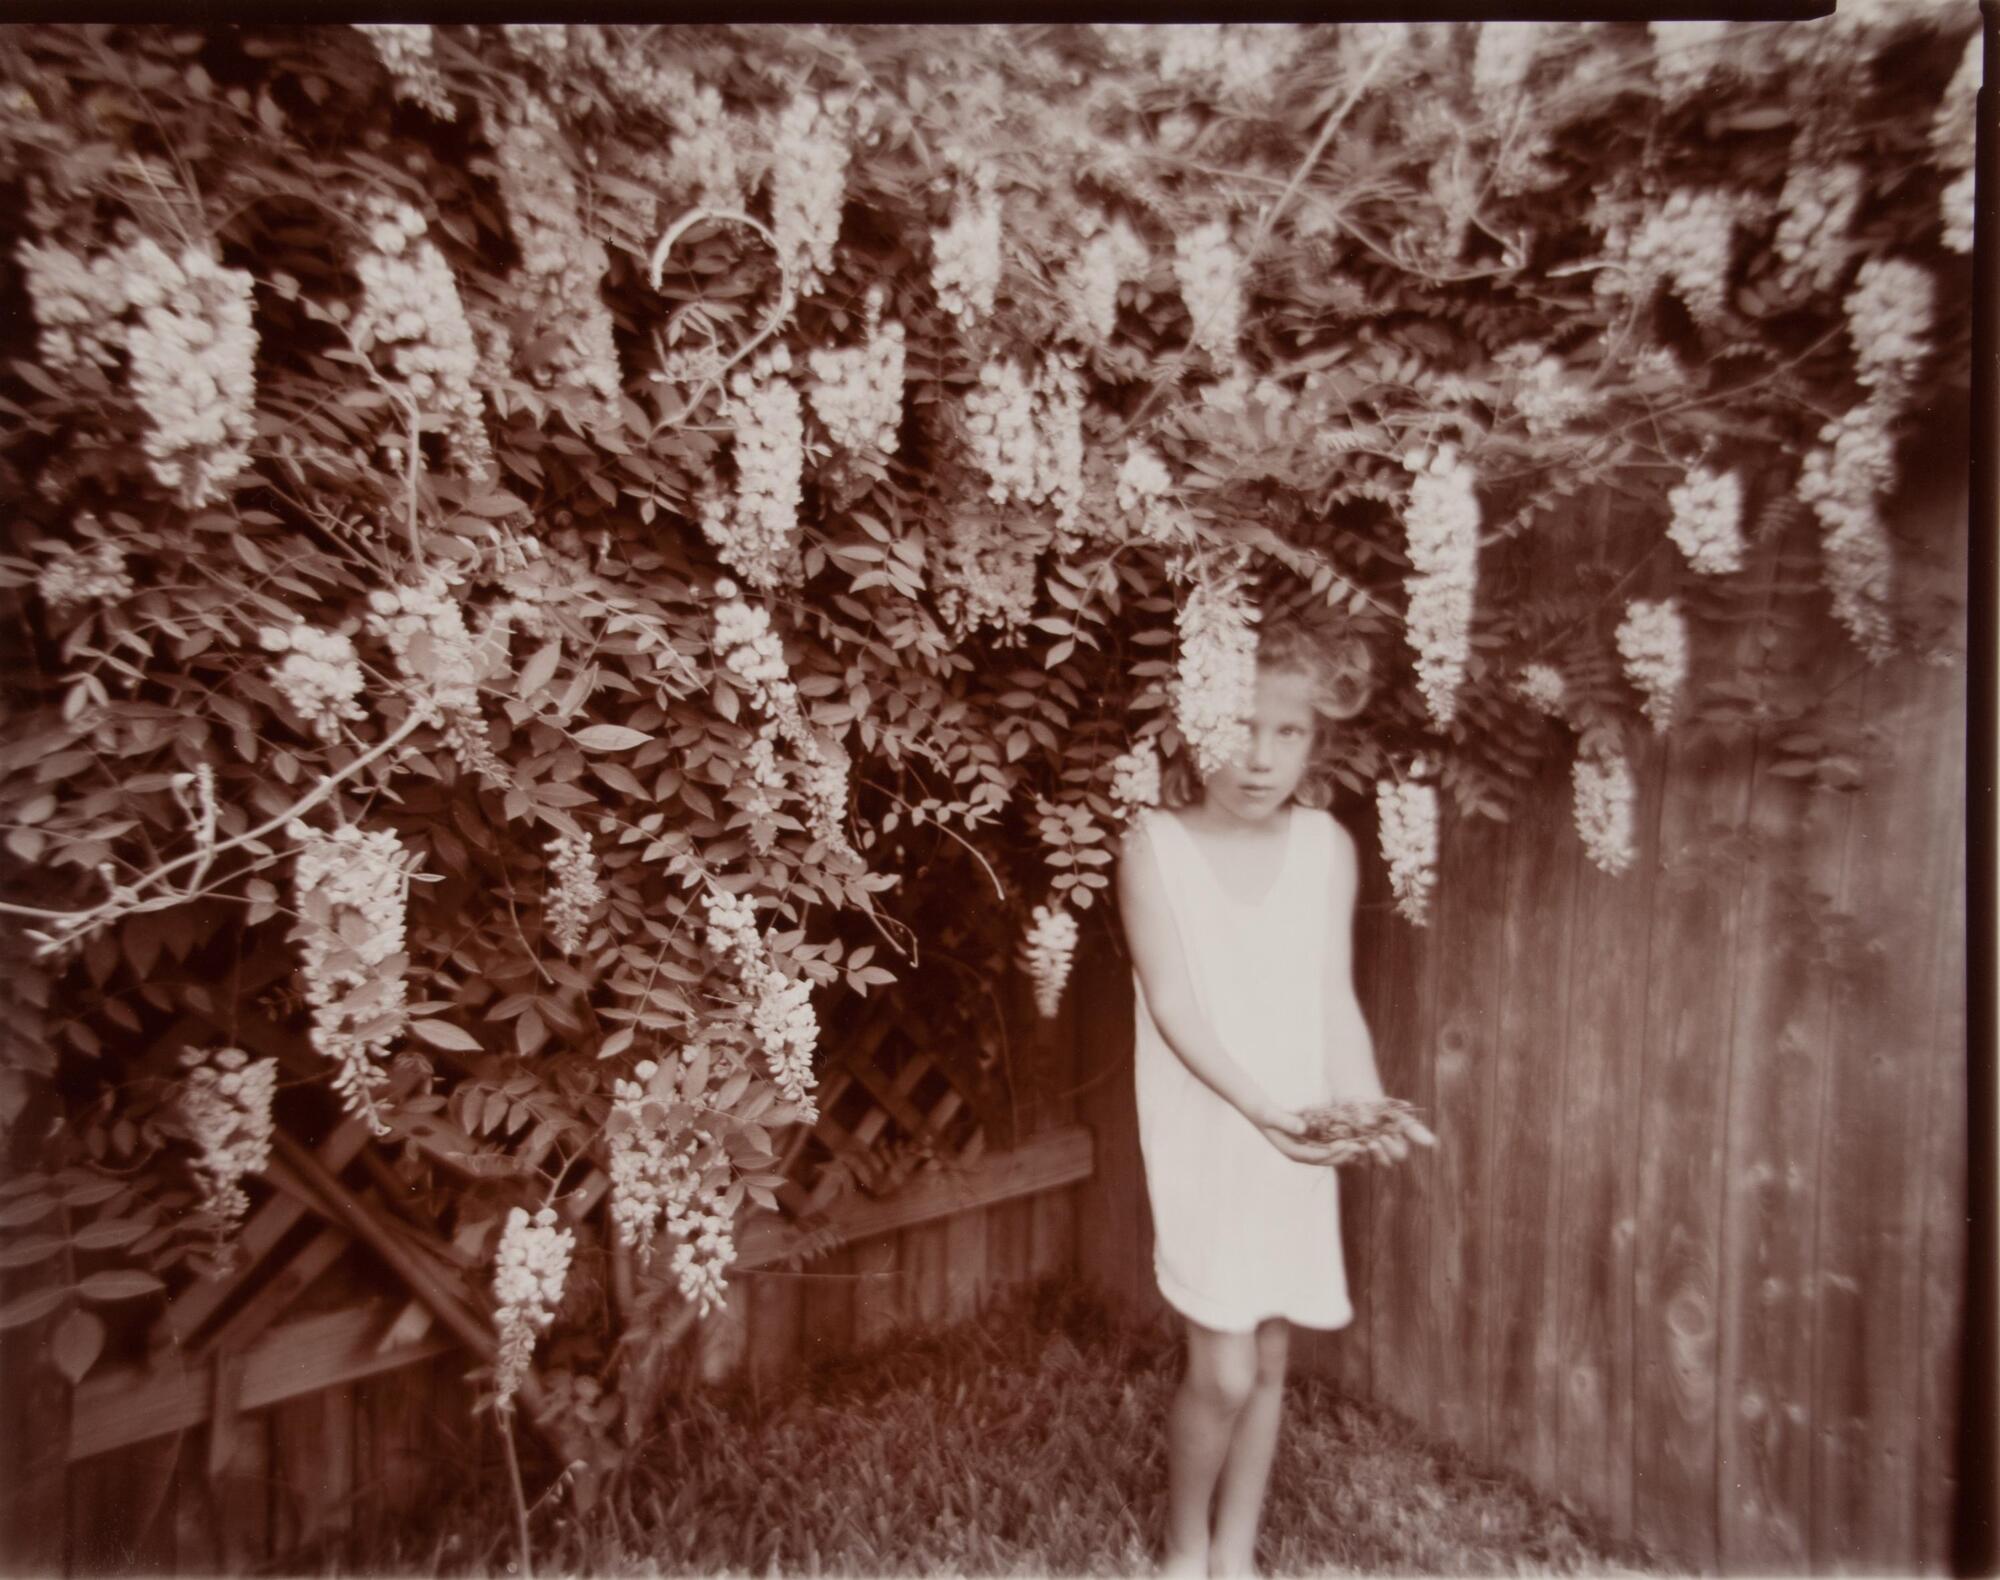 In this photograph of a young girl she wears a light-colored dress and is standing underneath a wisteria plant. The plant grows over a wooden fence. The girl holds plant material in her hands.